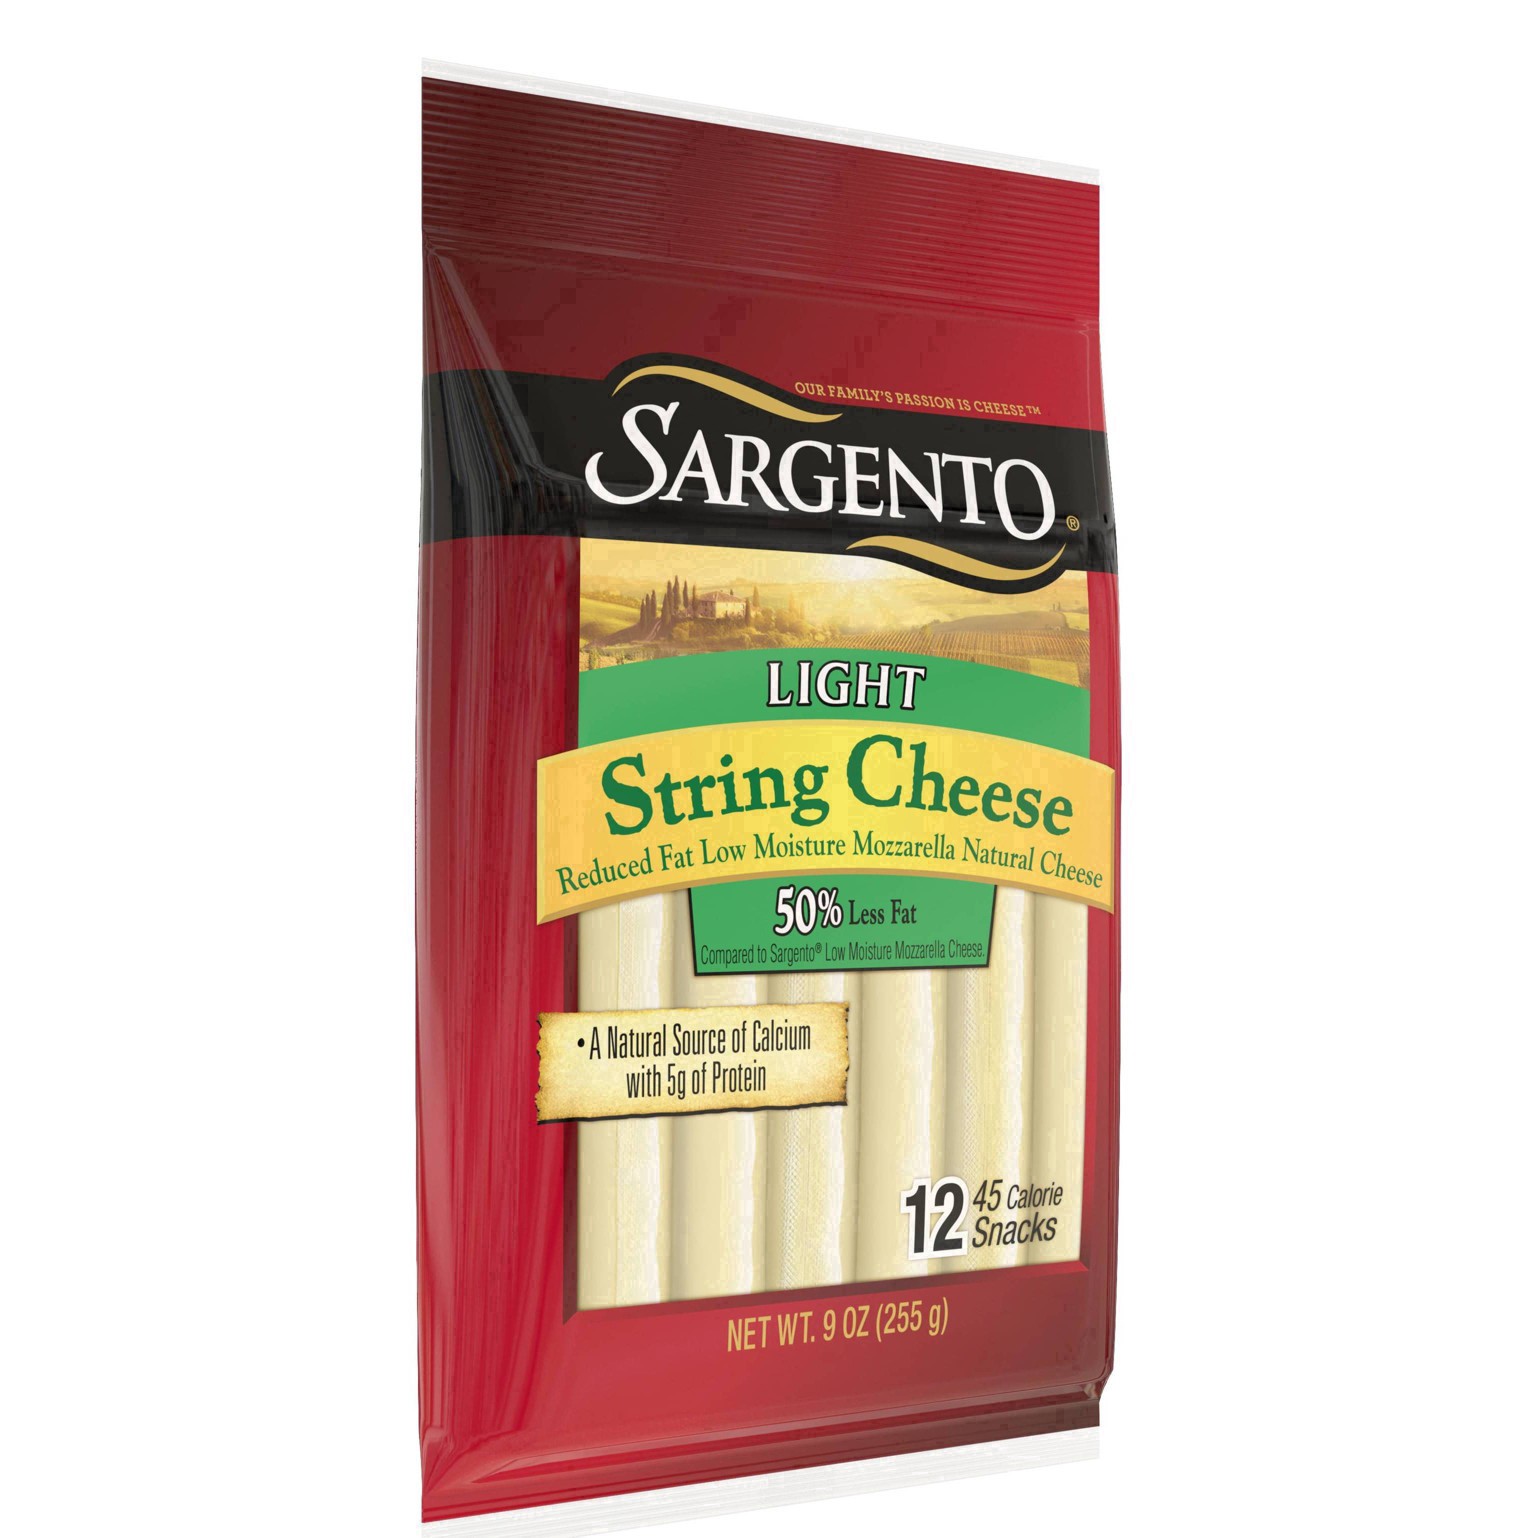 slide 42 of 62, Sargento Reduced Fat Low Moisture Part-Skim Mozzarella Natural Cheese Light String Cheese Snacks, 9 oz., 12-Count, 9 oz